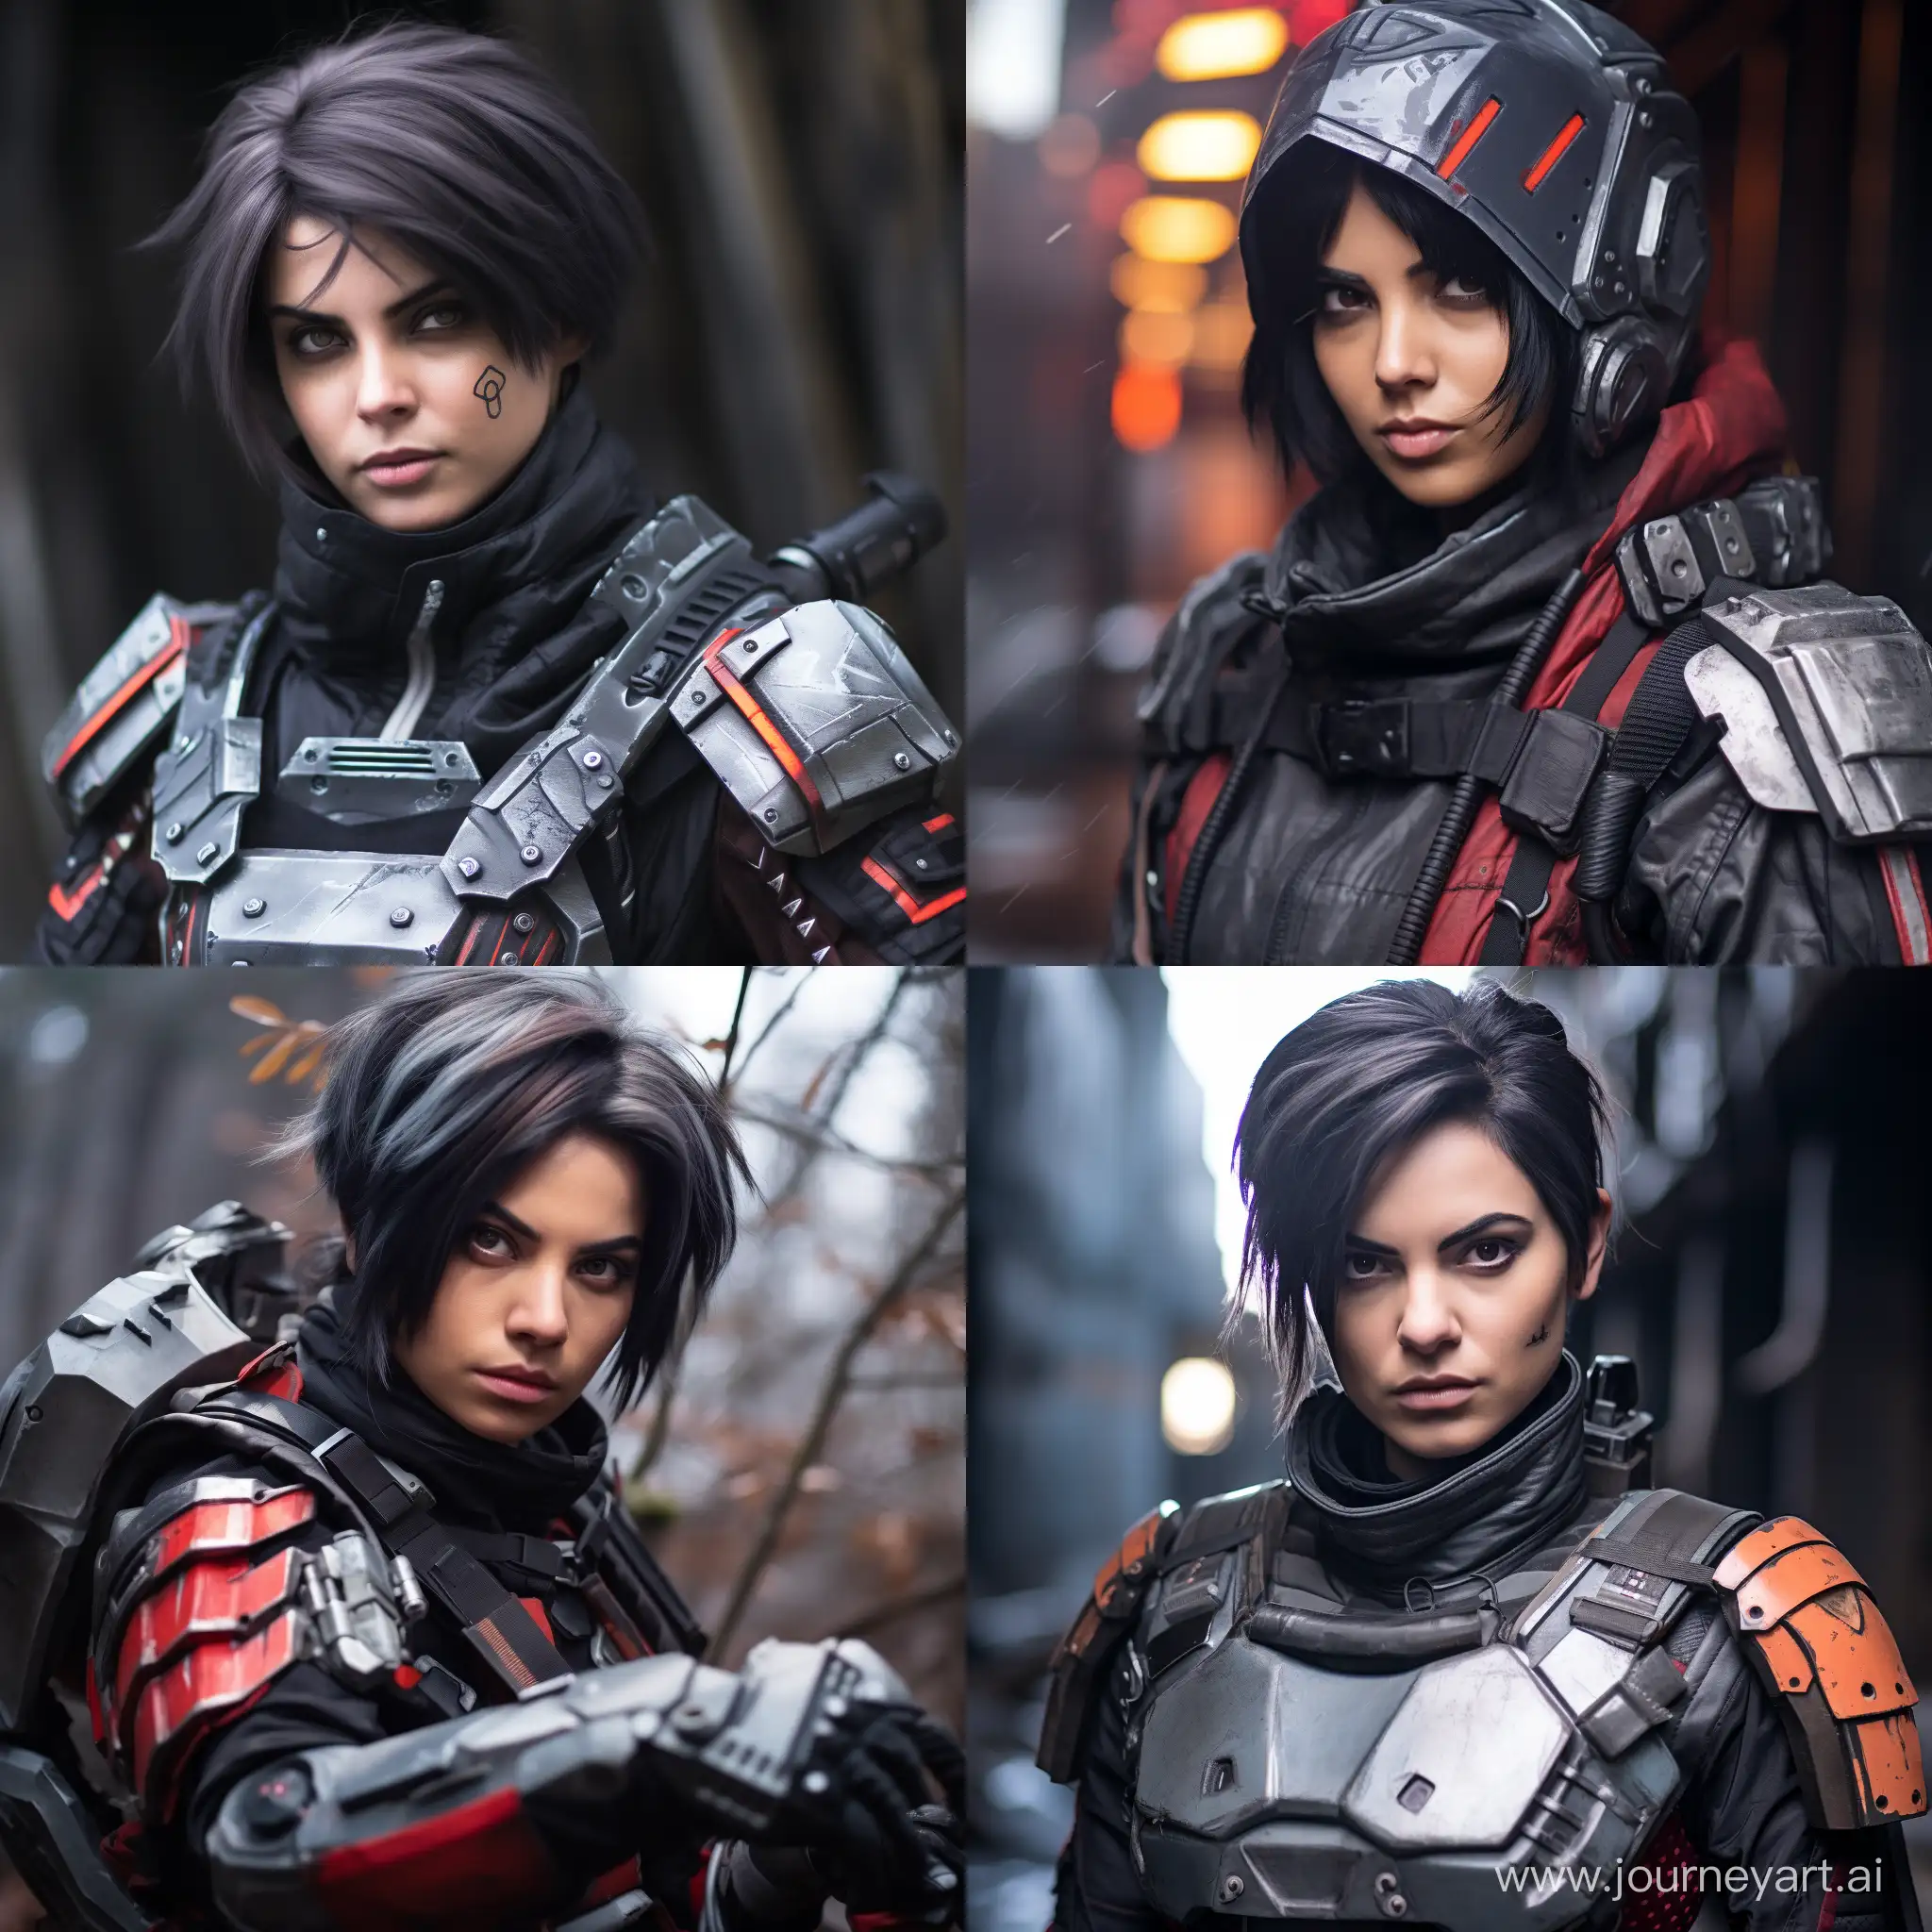 Wraith from Apex Legends cosplay photo close-up